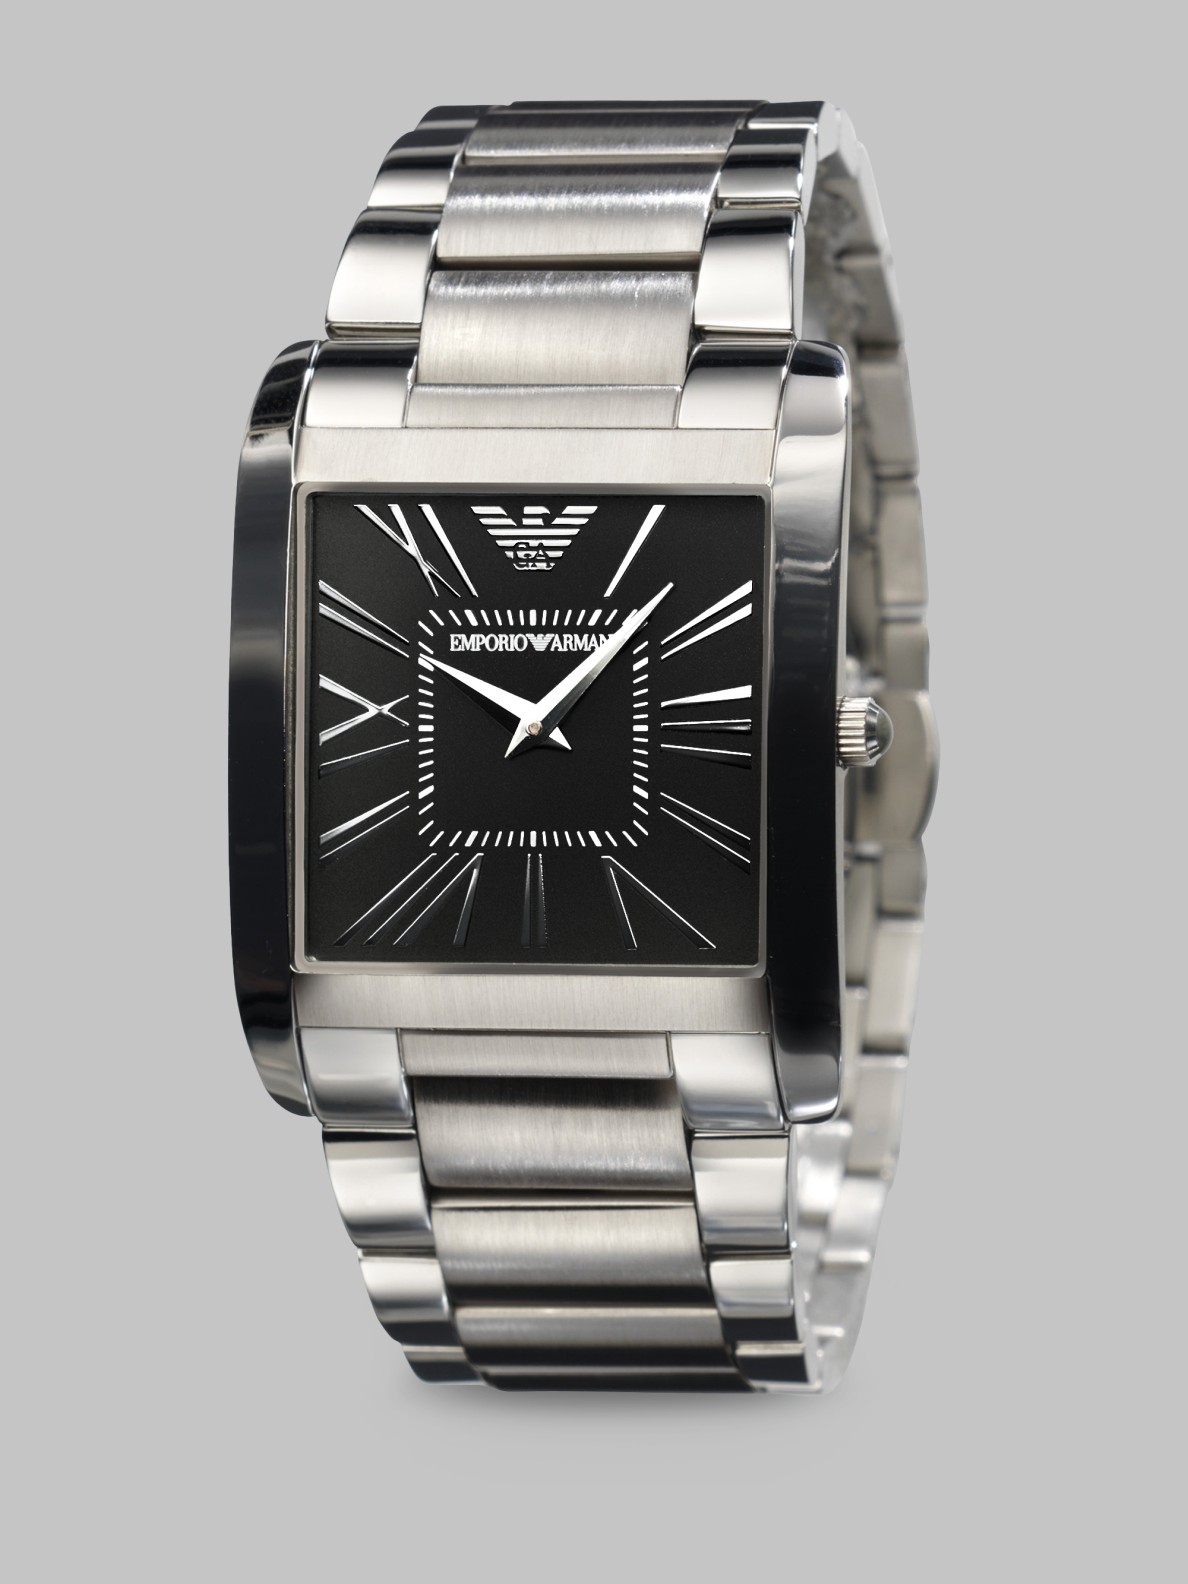 Lyst - Emporio armani Stainless Steel Square Watch in Metallic